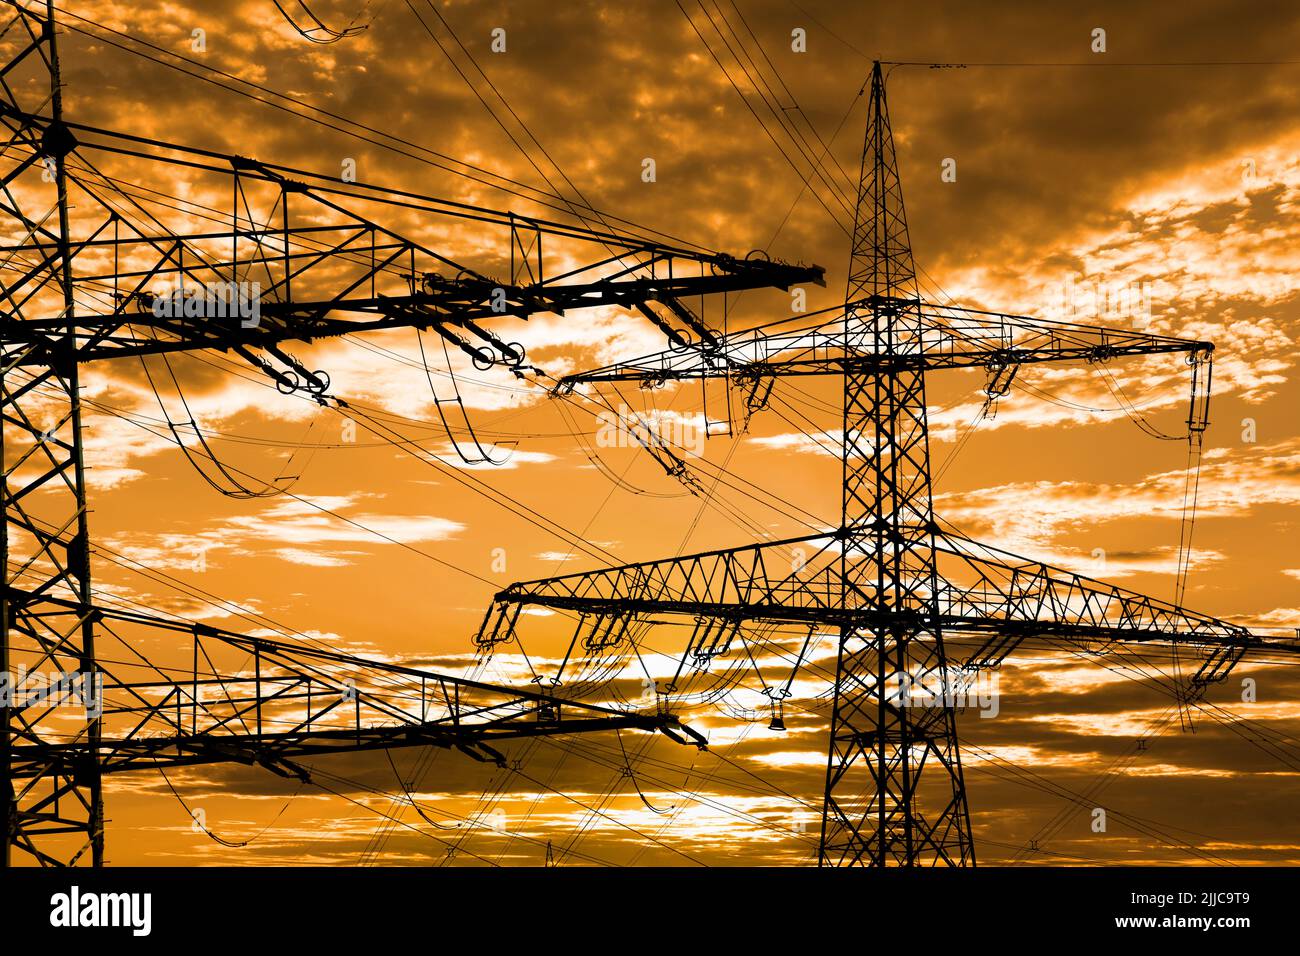 Many elecrtic poles in front of sky with clouds Stock Photo